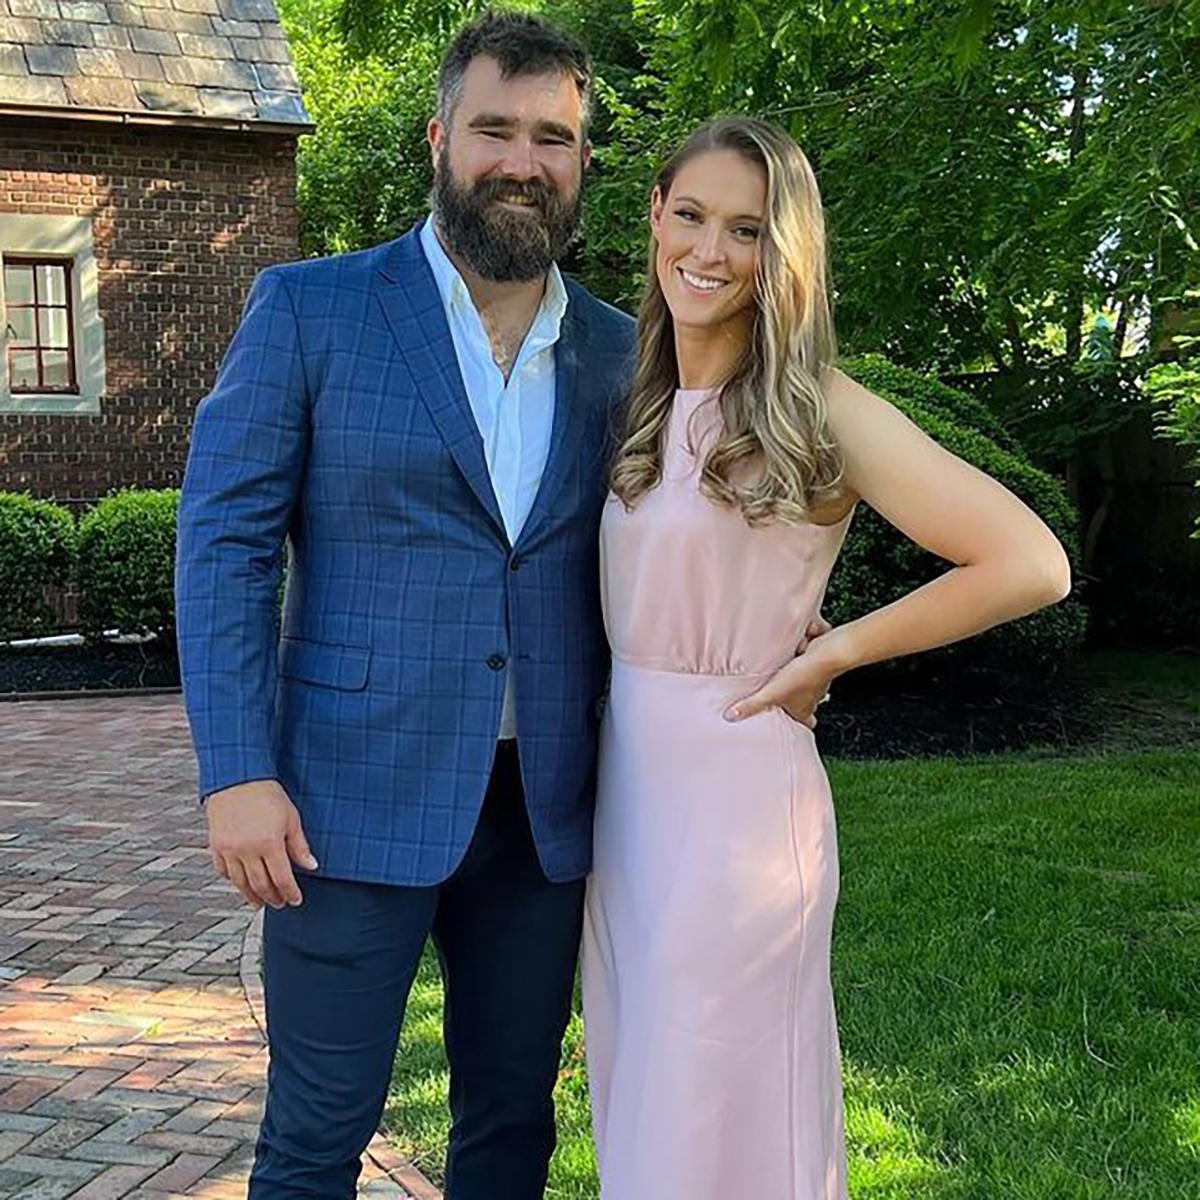 Jason Kelce's Wife Kylie Kelce Is the True MVP for Getting Him This Retirement Gift